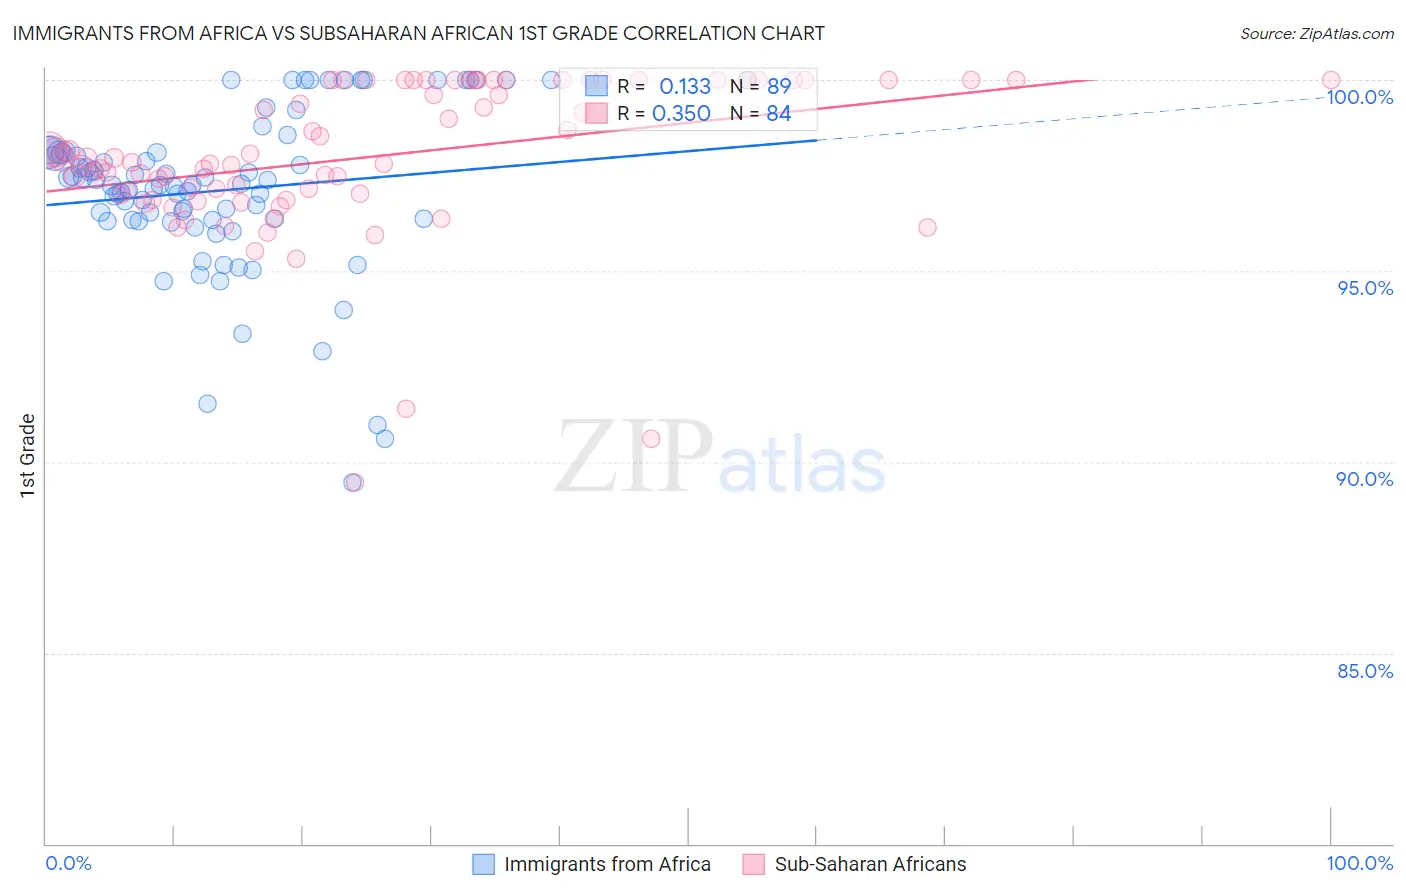 Immigrants from Africa vs Subsaharan African 1st Grade